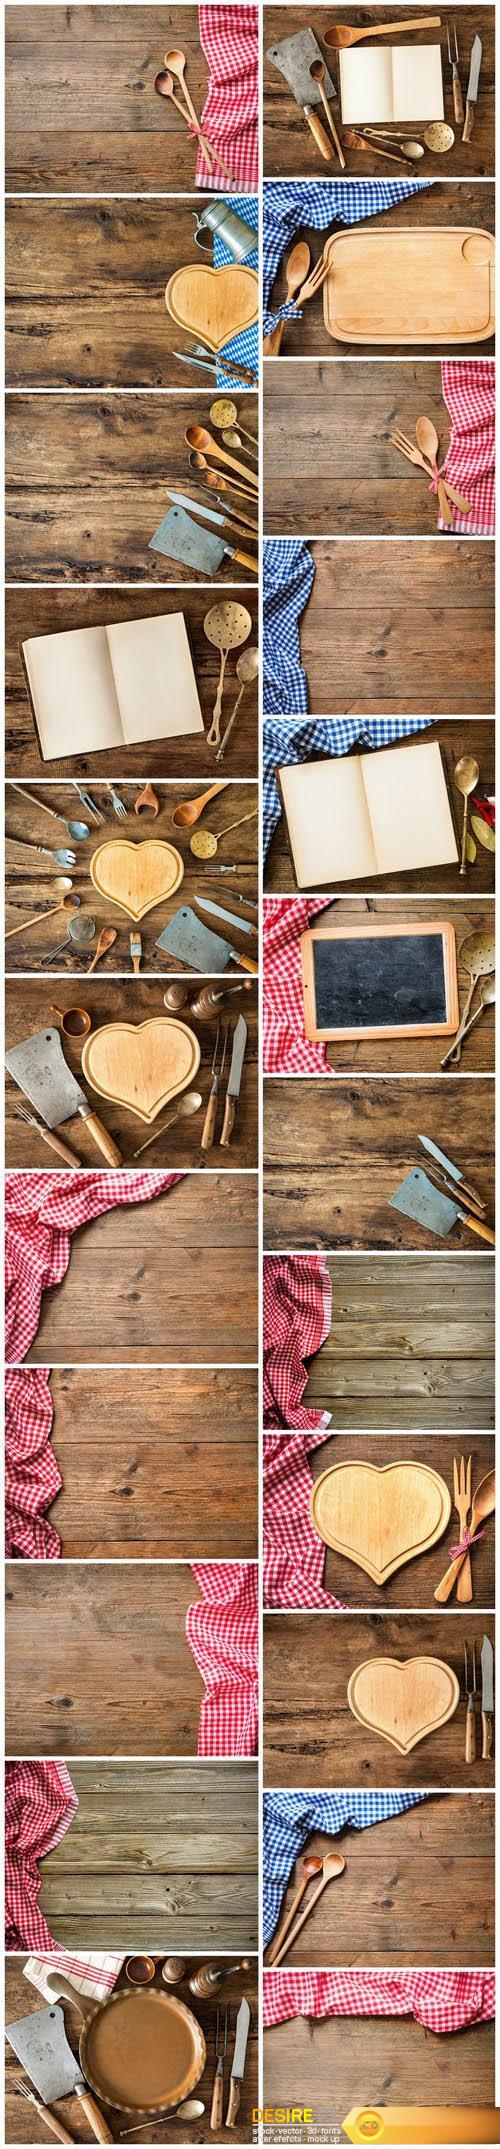 Vintage kitchen utensils on a wooden table - 23xUHQ JPEG